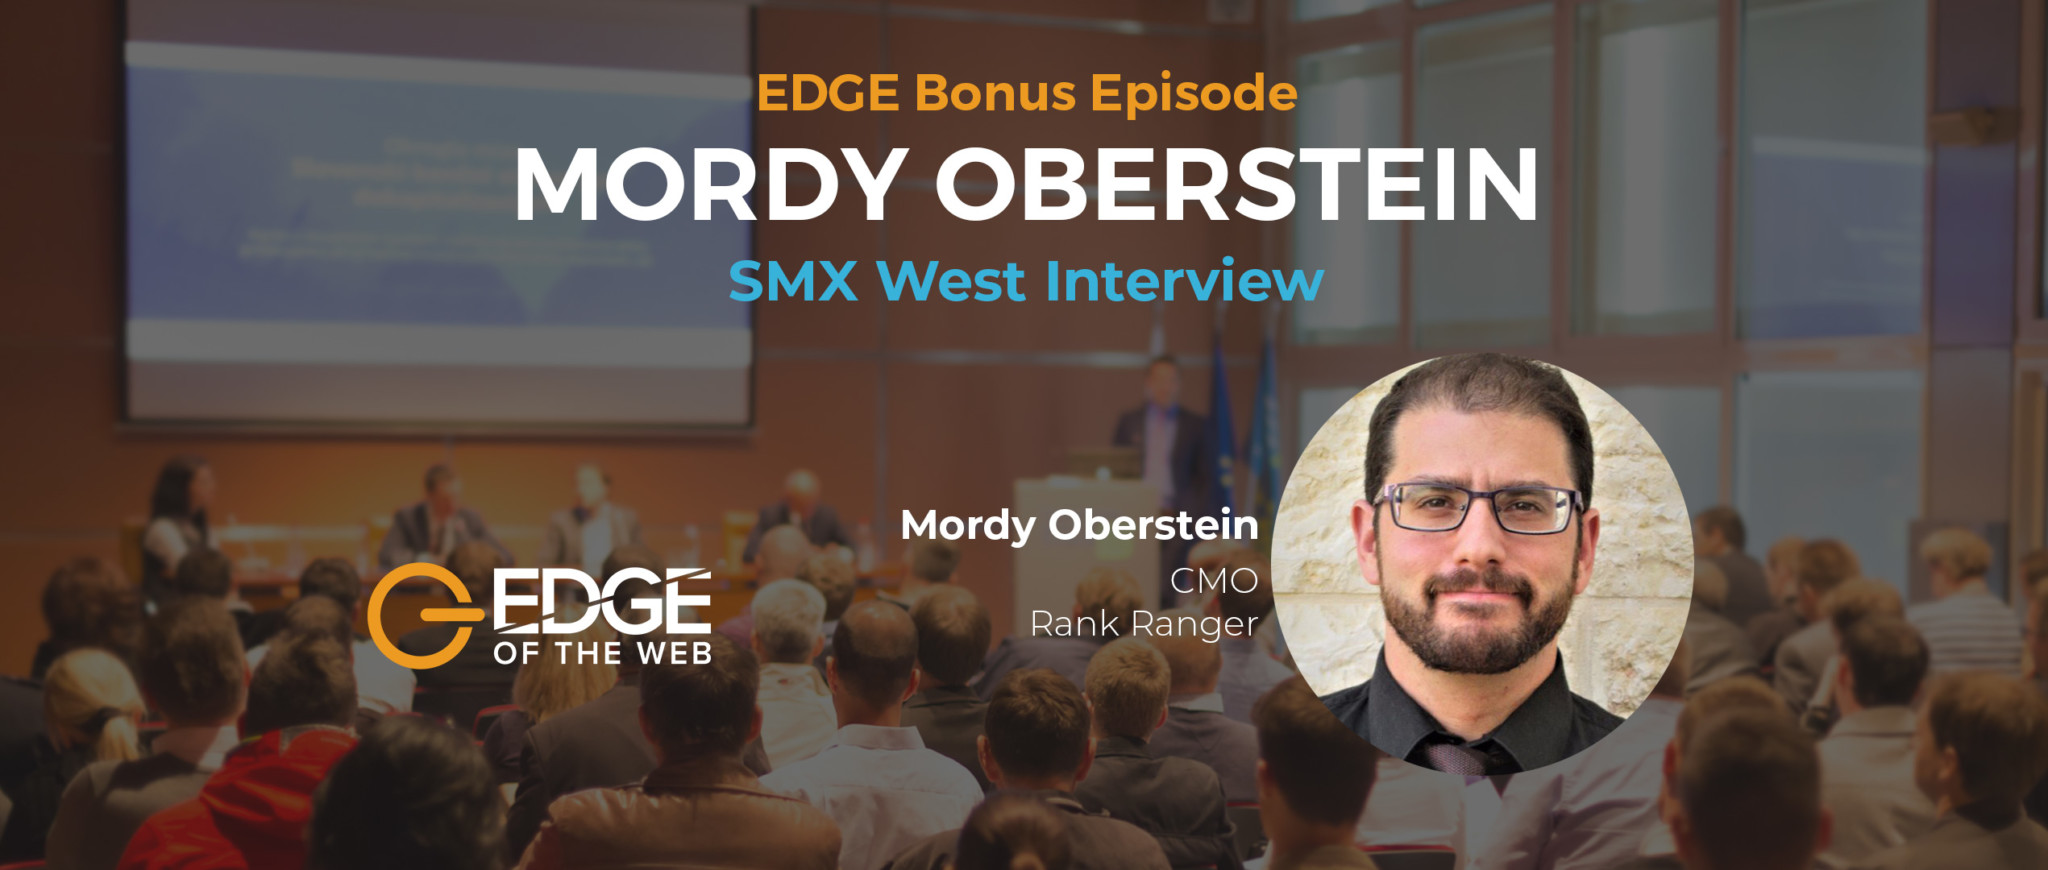 EDGE at SMX West with Mordy Oberstein